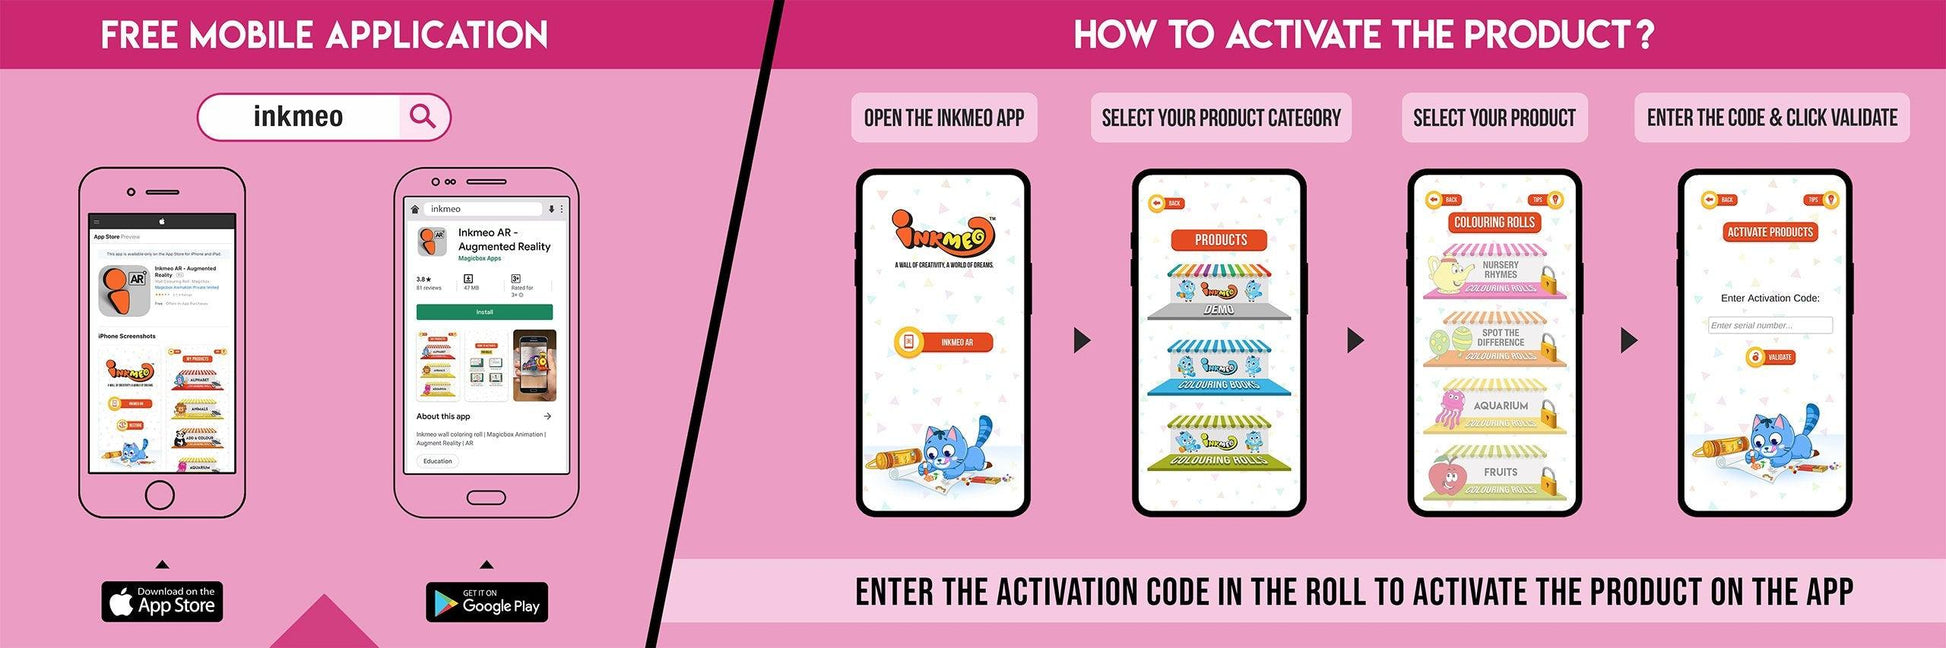 The image has a pink background which is divided into two parts. The first part shows a free mobile application for downloading the Inkmeo app in the App Store and Google Store. The second part shows four mobile phones with the caption "To open the Inkmeo app, select your product category, select your product, and enter the code & click validate.